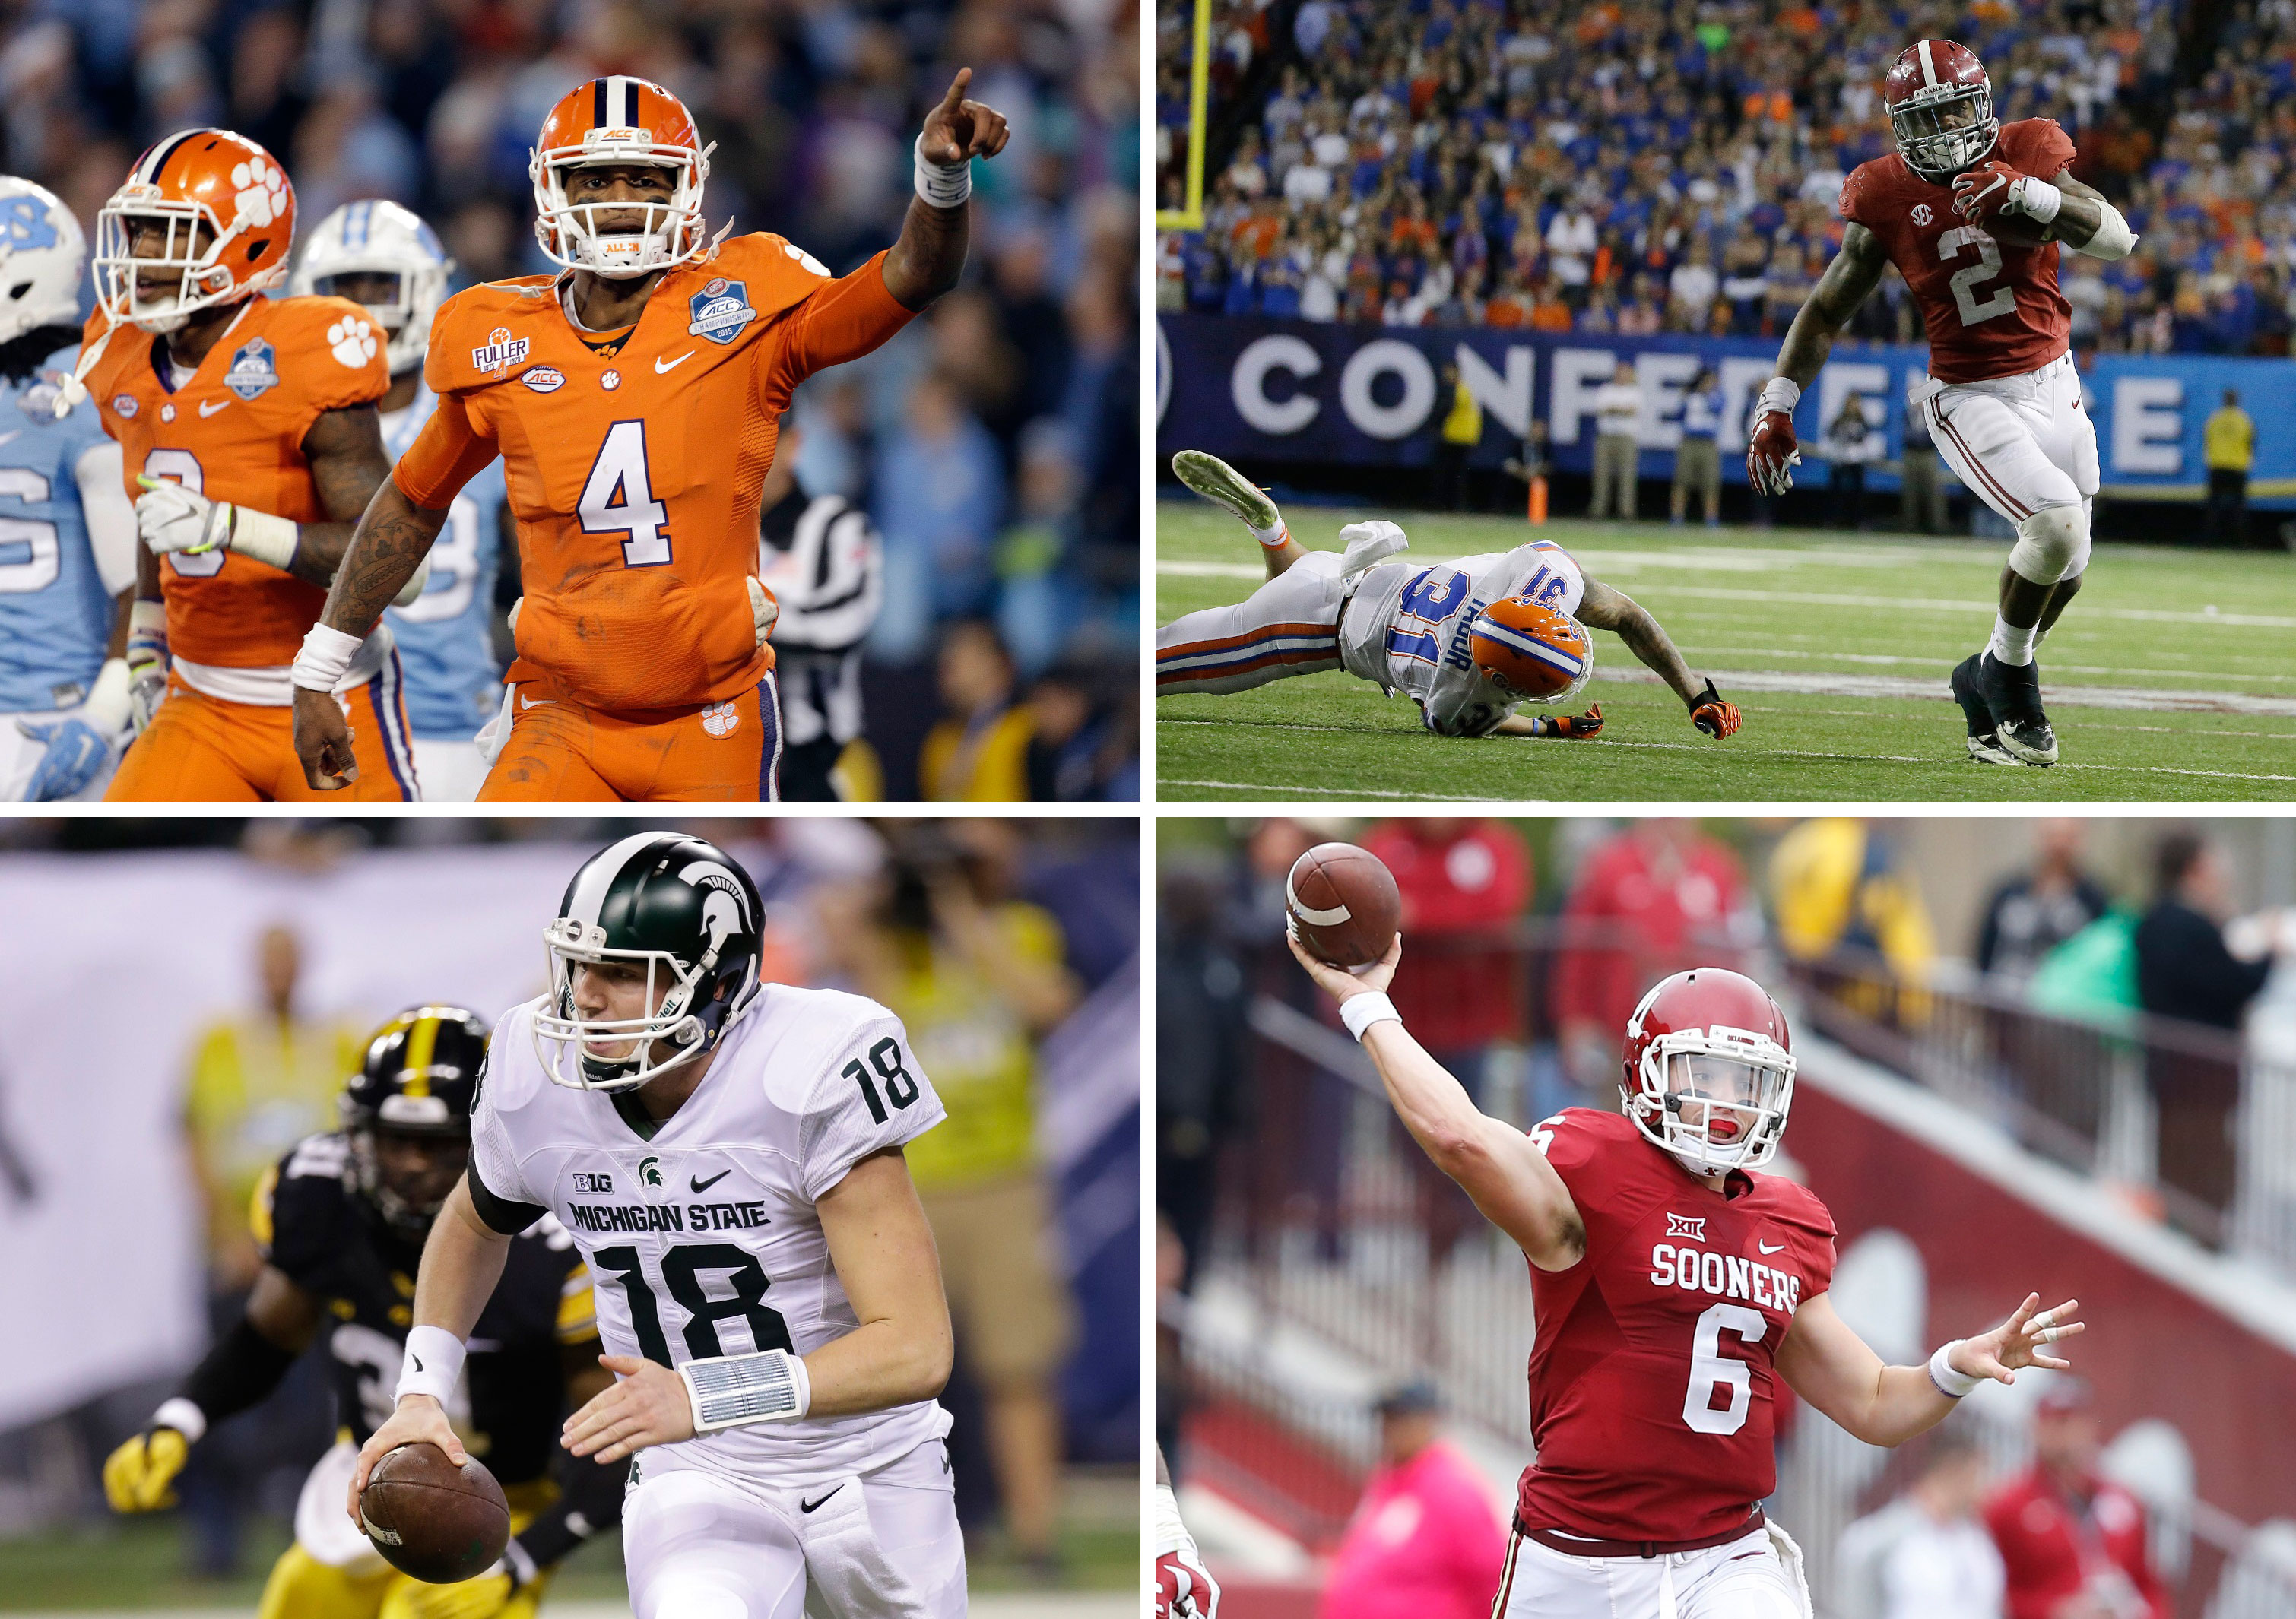 College Football Playoff preview and predictions